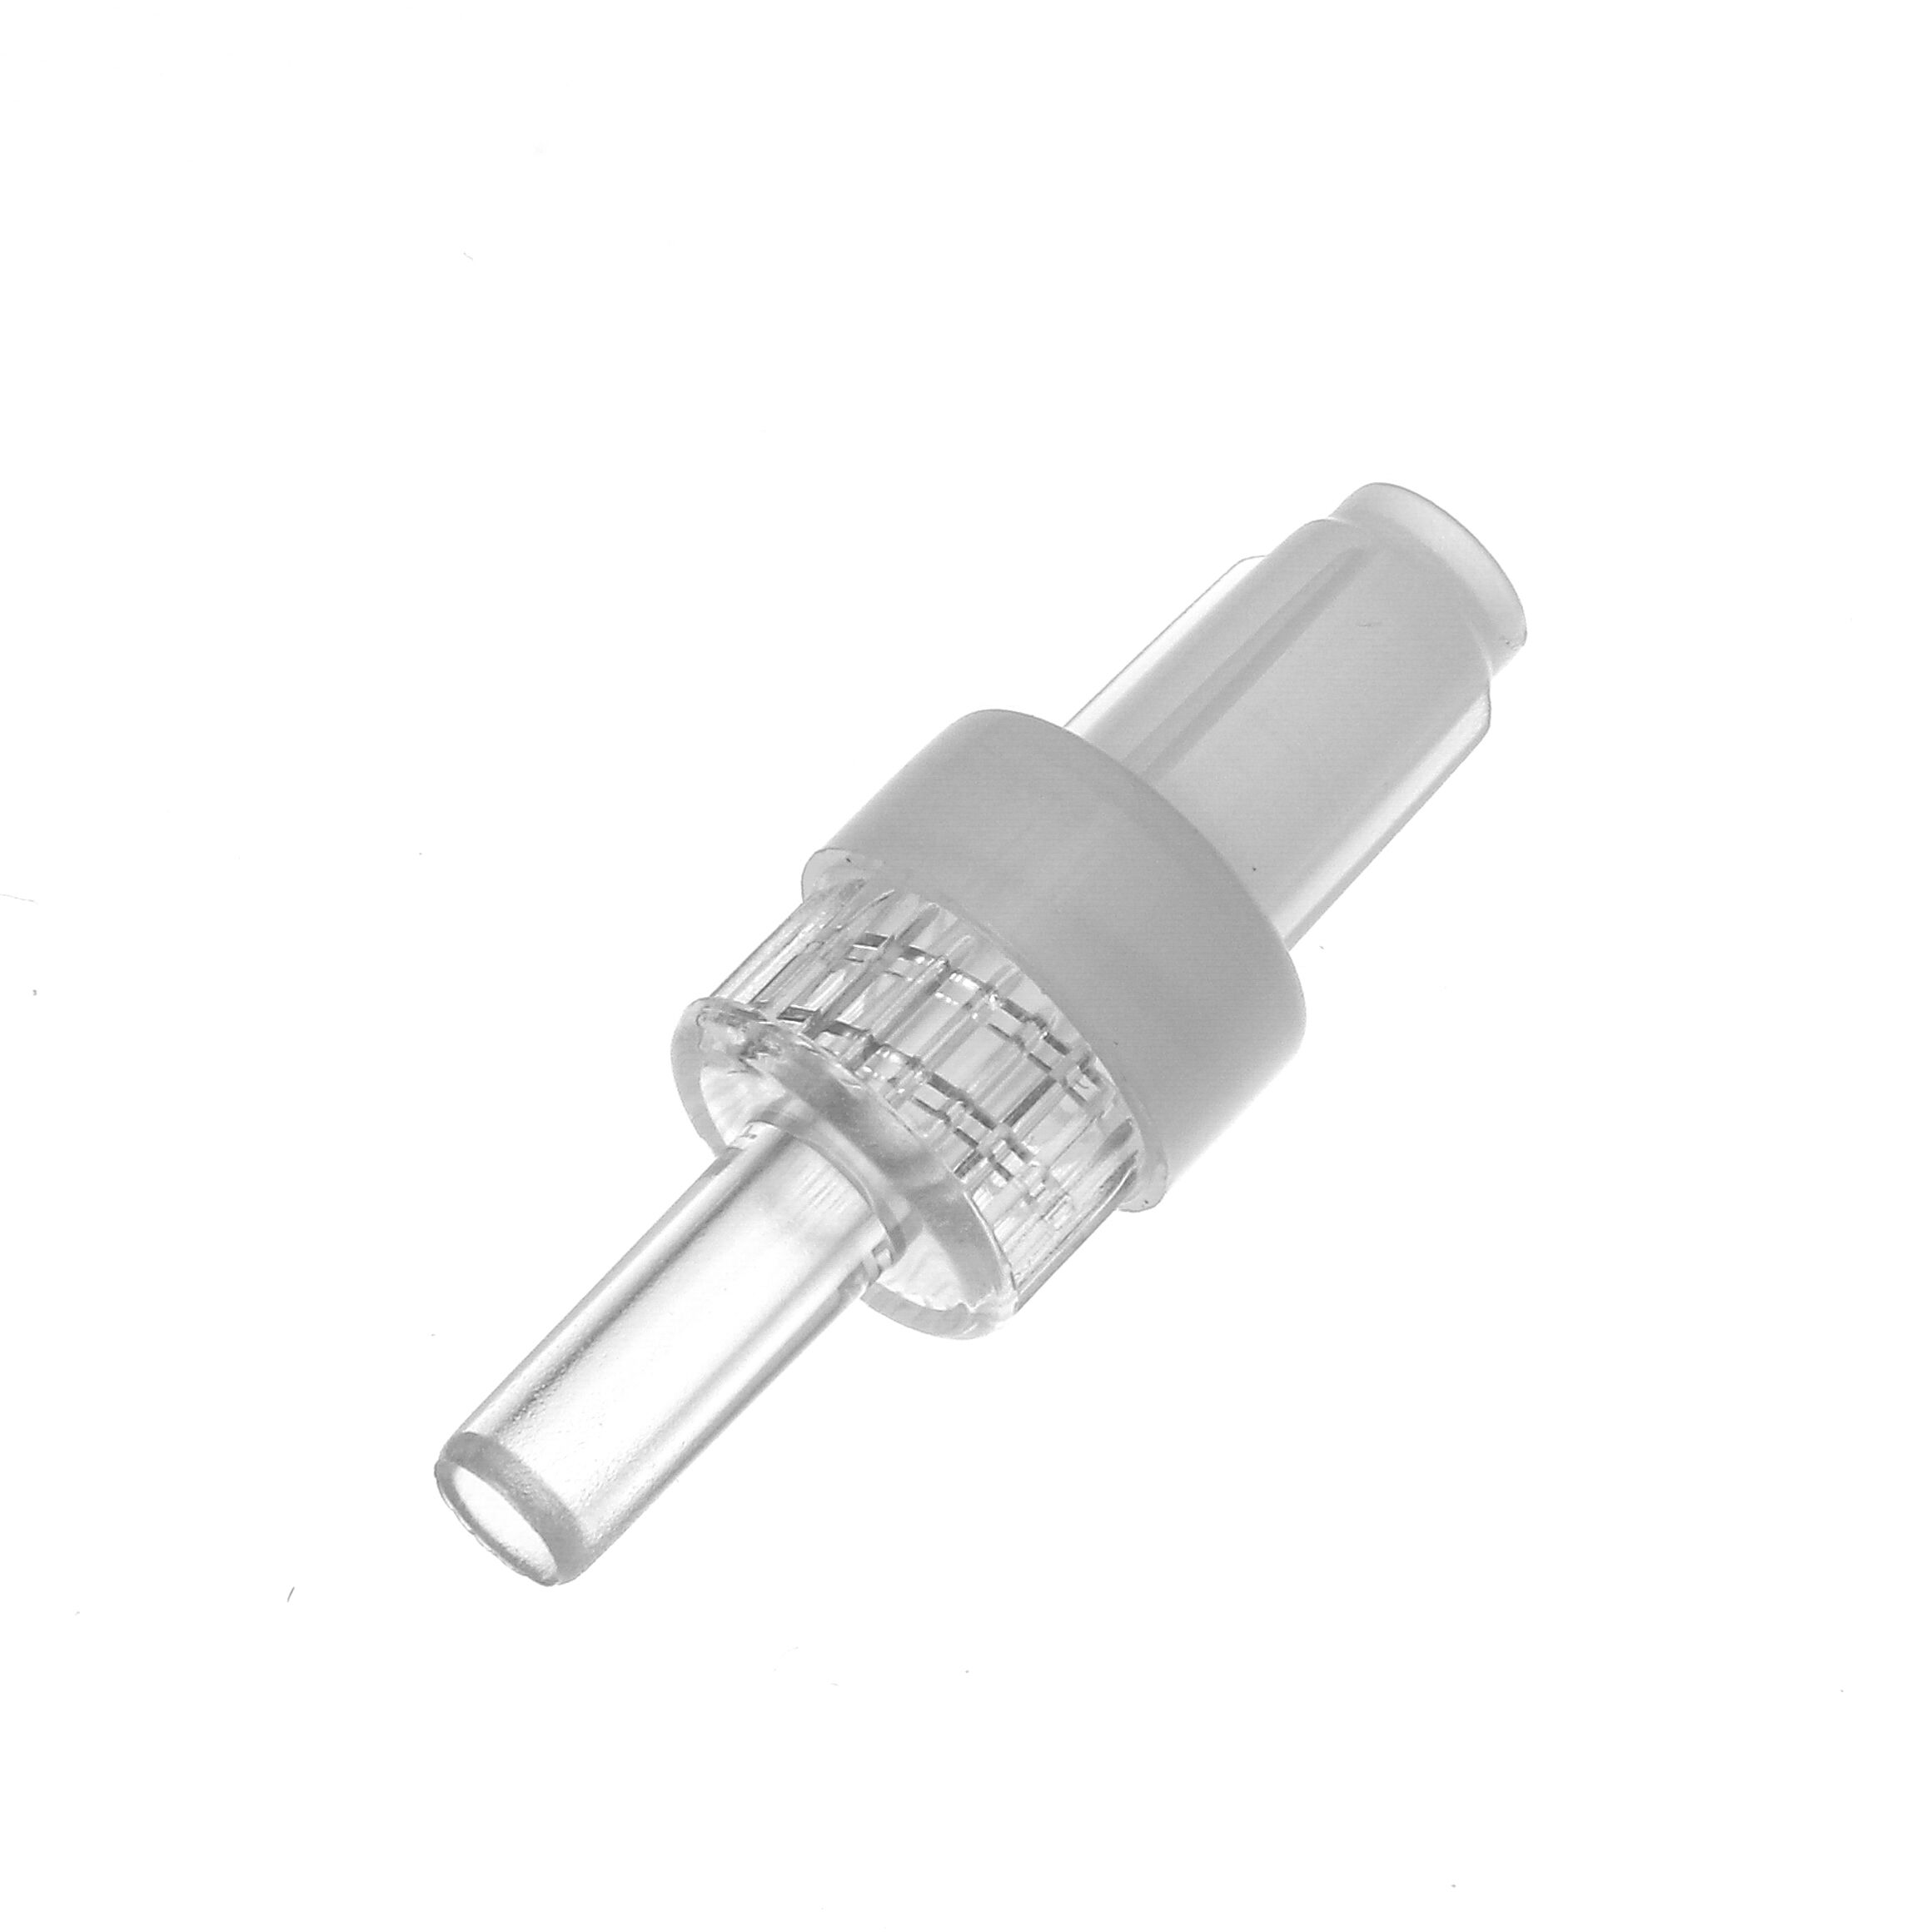 Male Luer Lock Connector